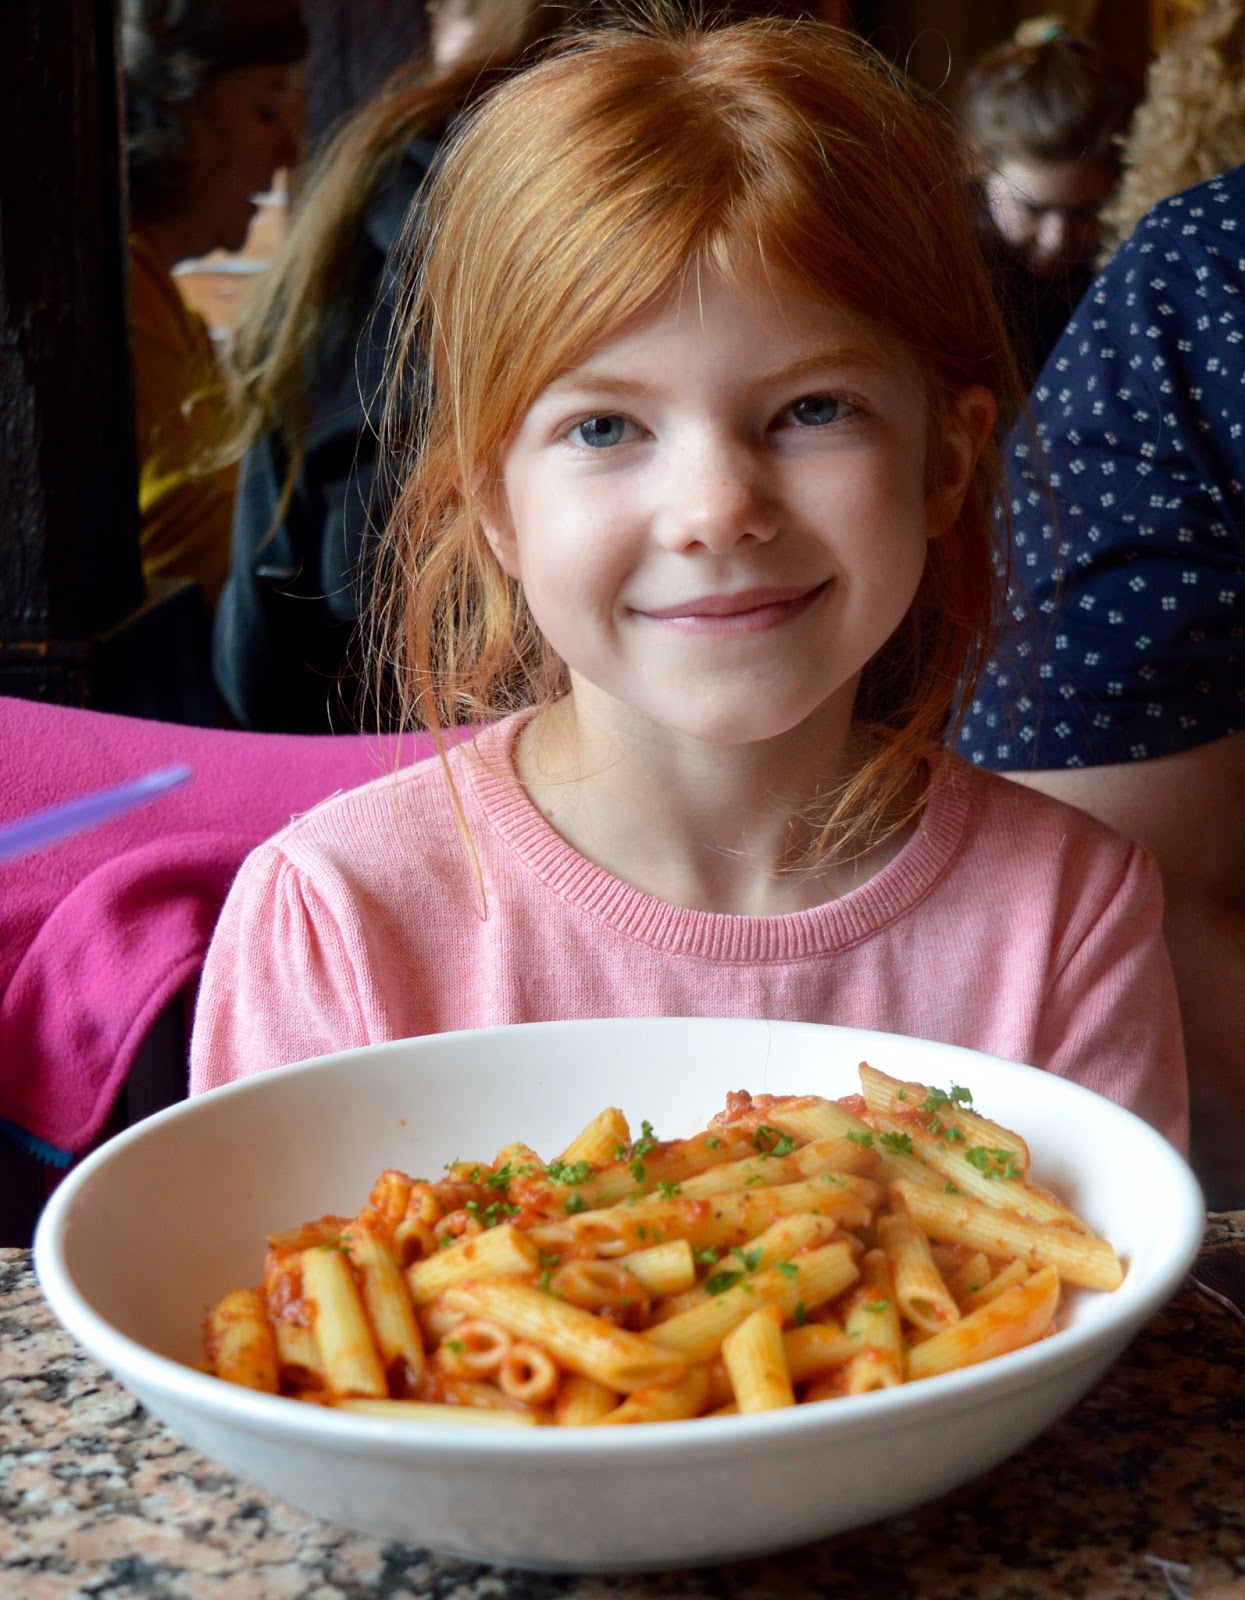 Great Days Out with Northern  | Our Day Trip to Carlisle by Train - Franco's Italian Restaurant kids pasta